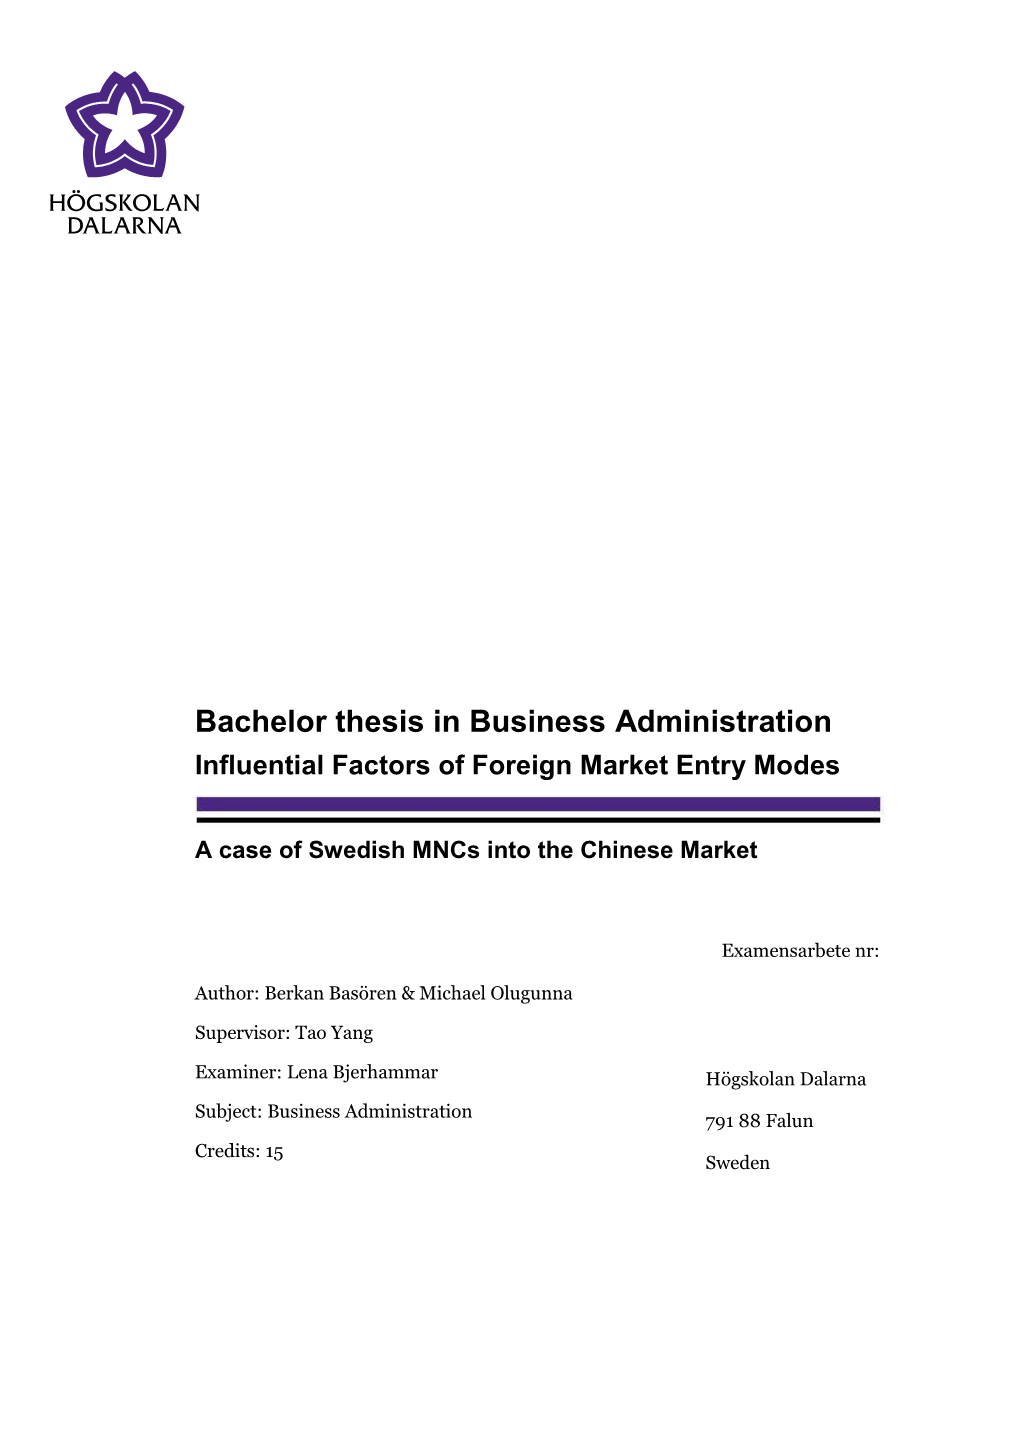 Bachelor Thesis in Business Administration Influential Factors of Foreign Market Entry Modes